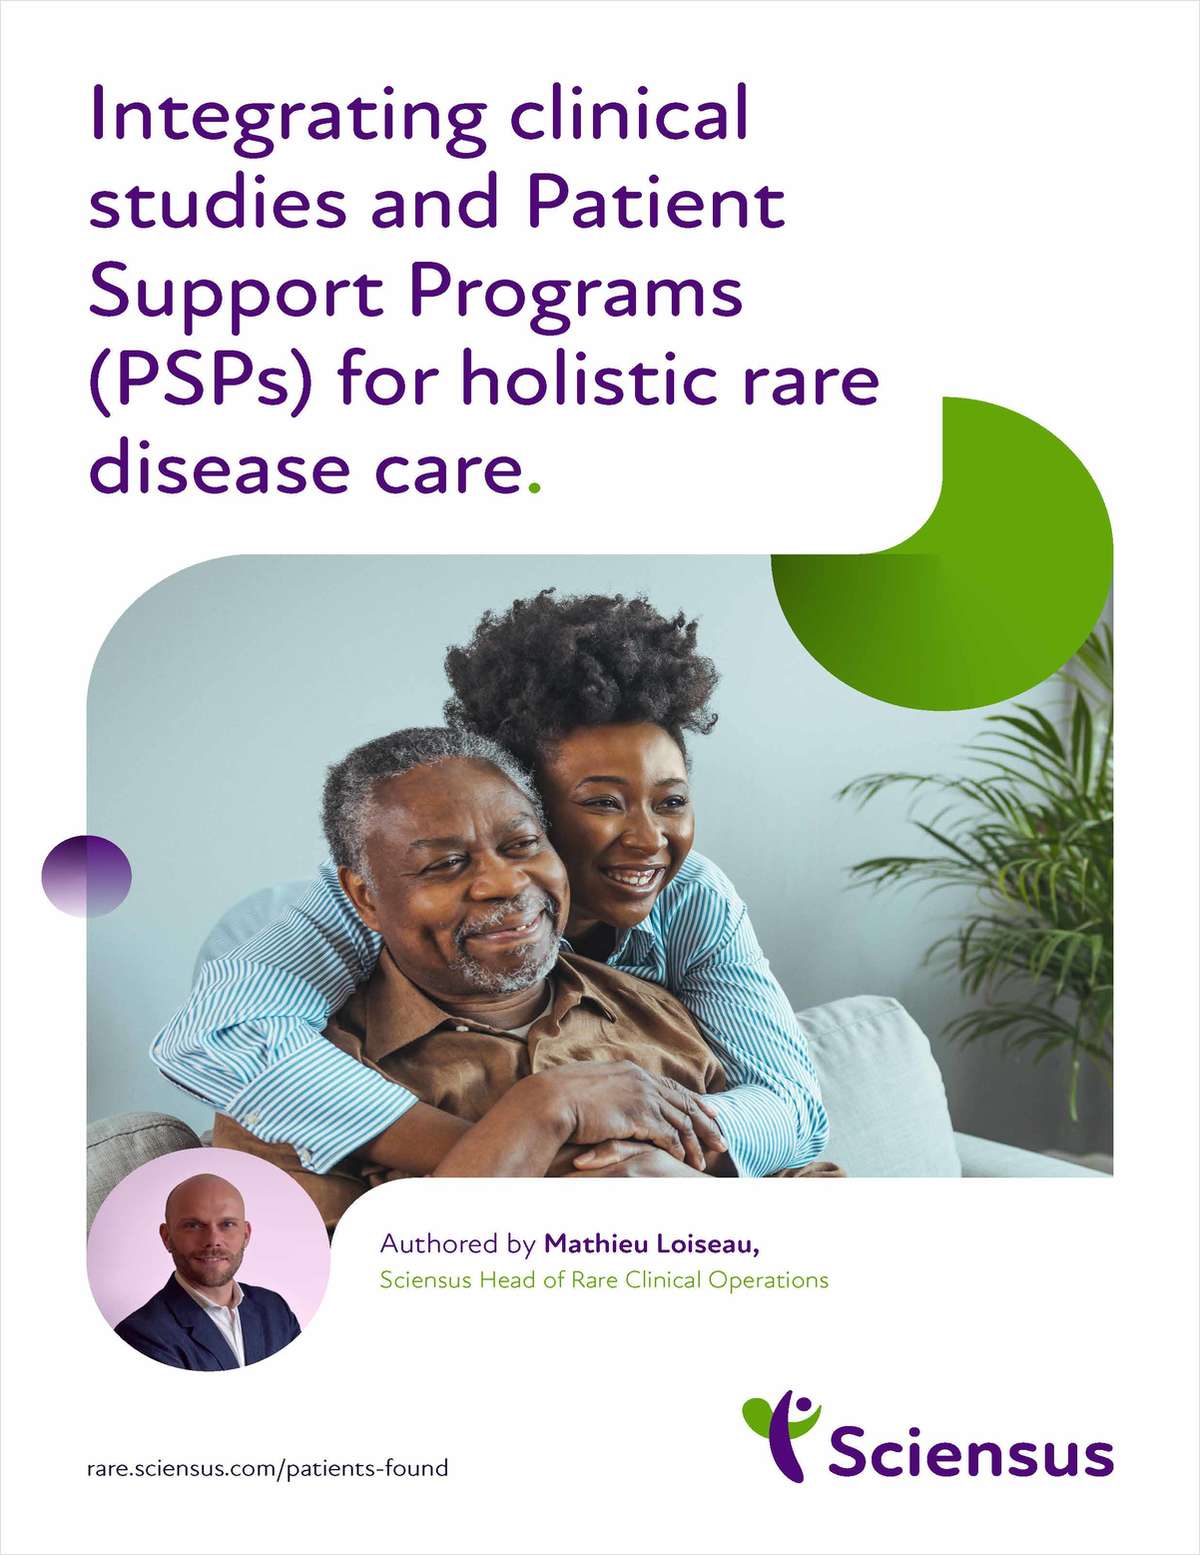 Integrating Clinical Studies and Patient Support Programs for Holistic Rare Disease Care